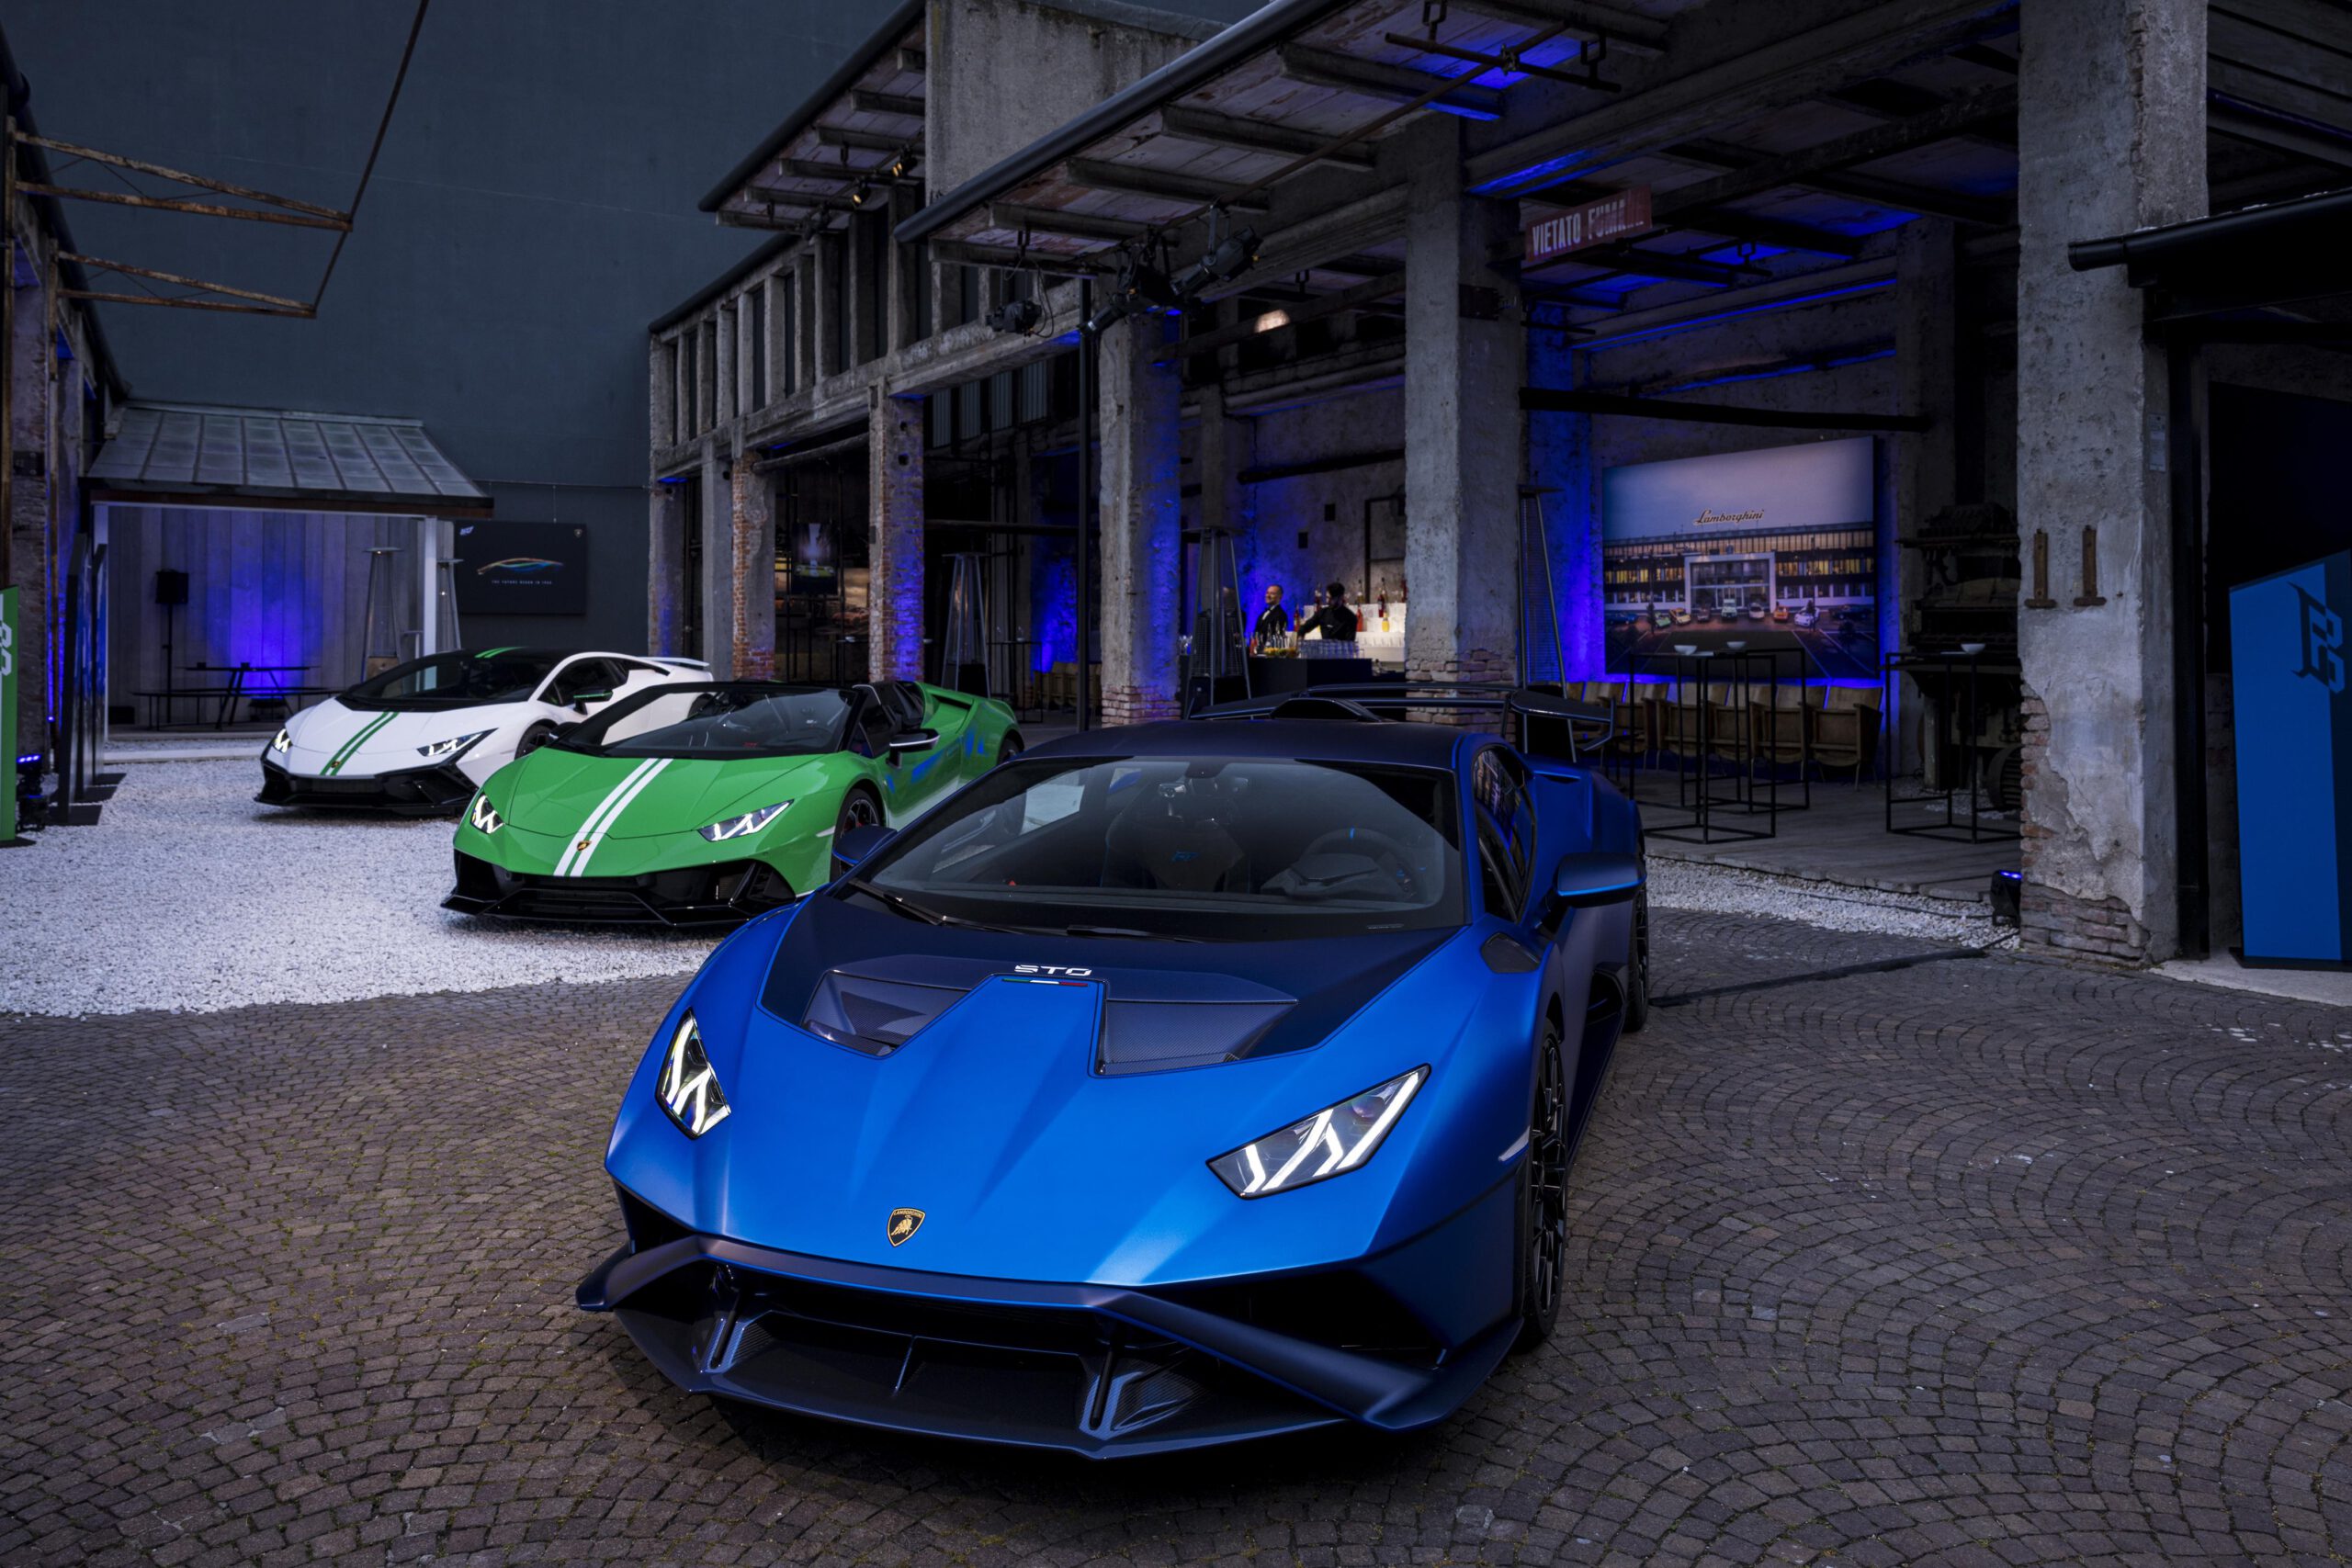 60th Anniversary Limited Editions of Huracán STO, Tecnica and EVO Spyder